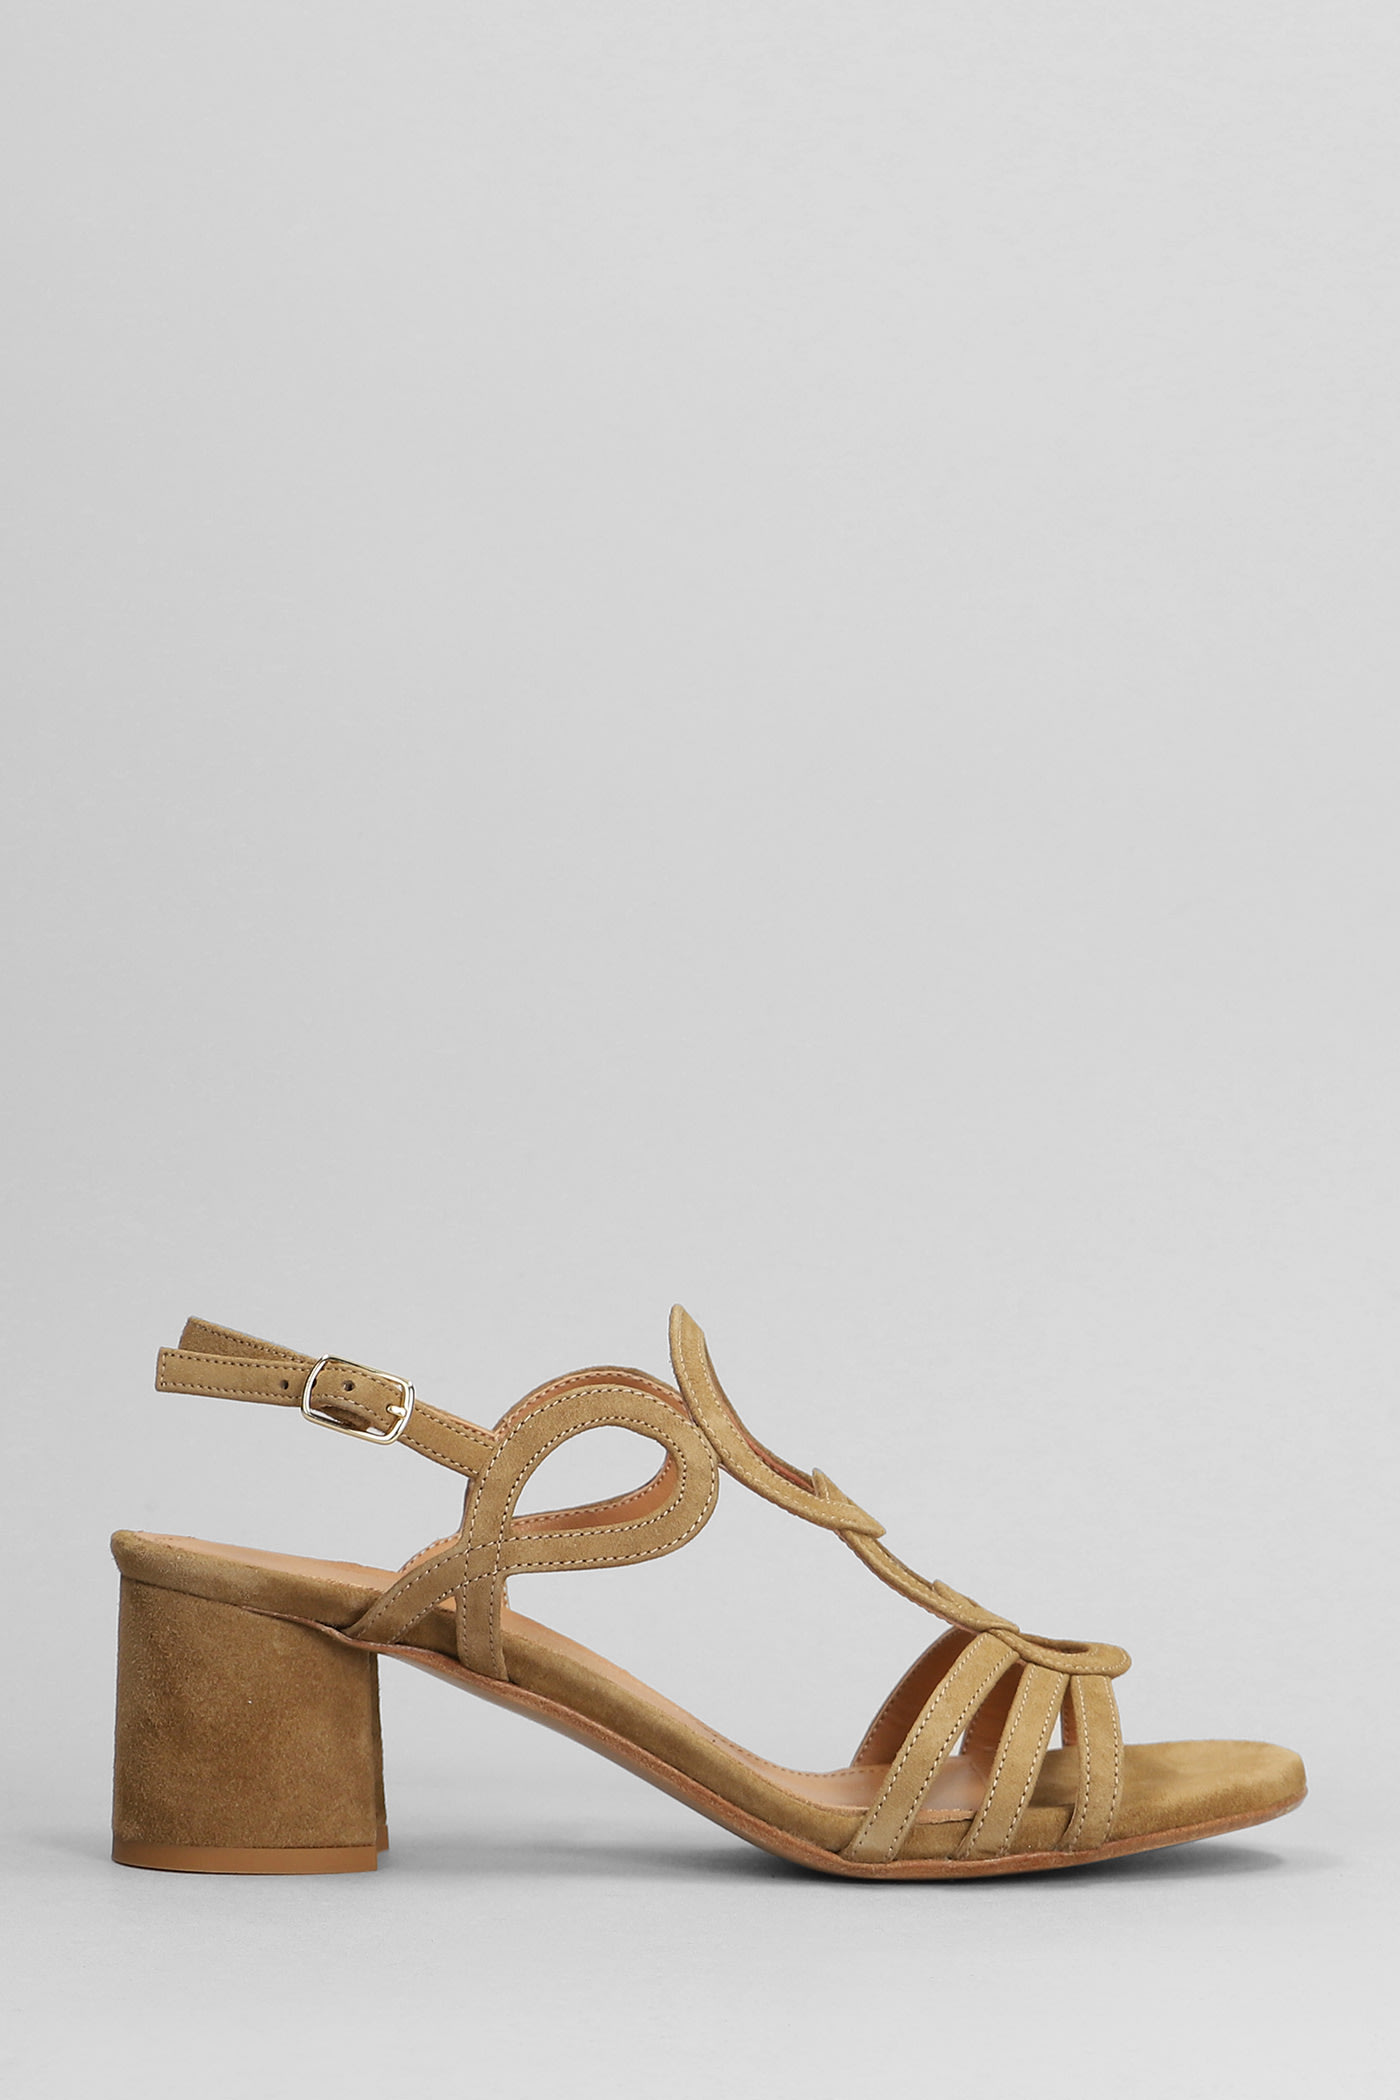 Julie Dee Sandals In Leather Color Suede